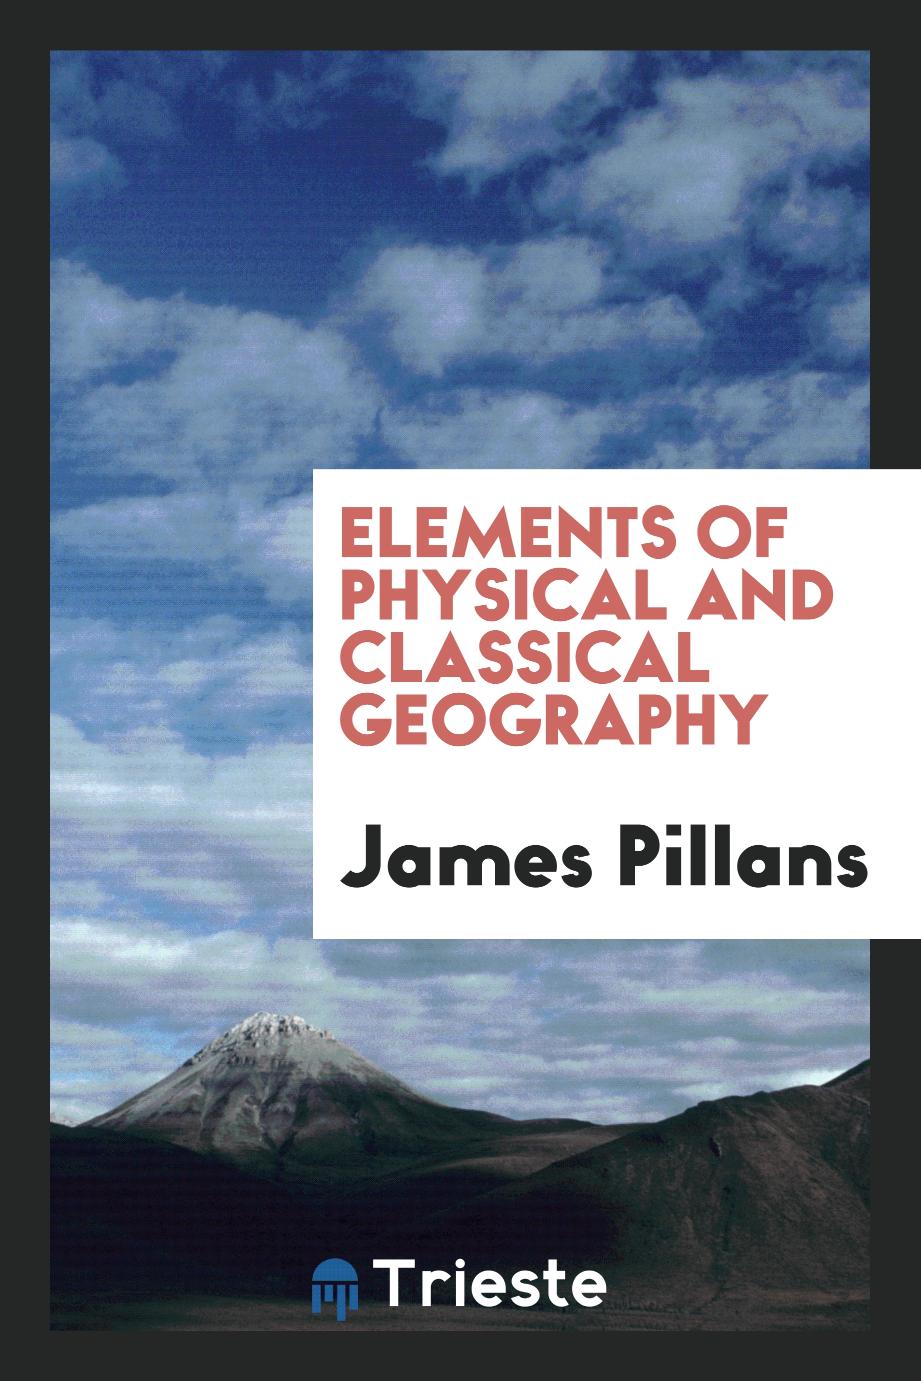 Elements of physical and classical geography